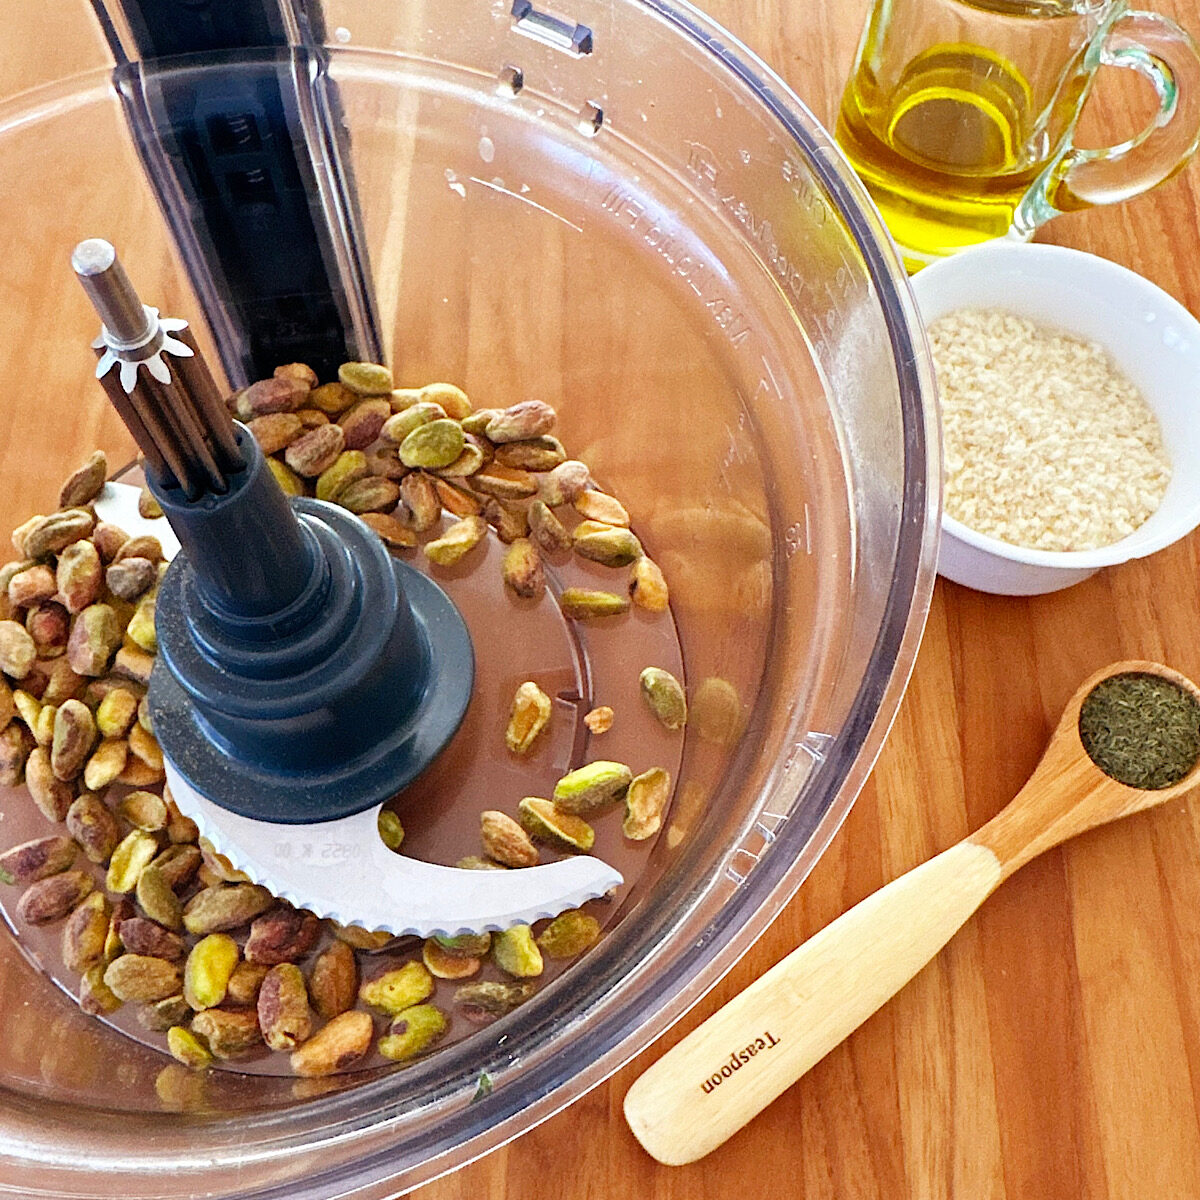 1/3 cup of shelled pistachio nuts in a food processor with panko and dill on the side.